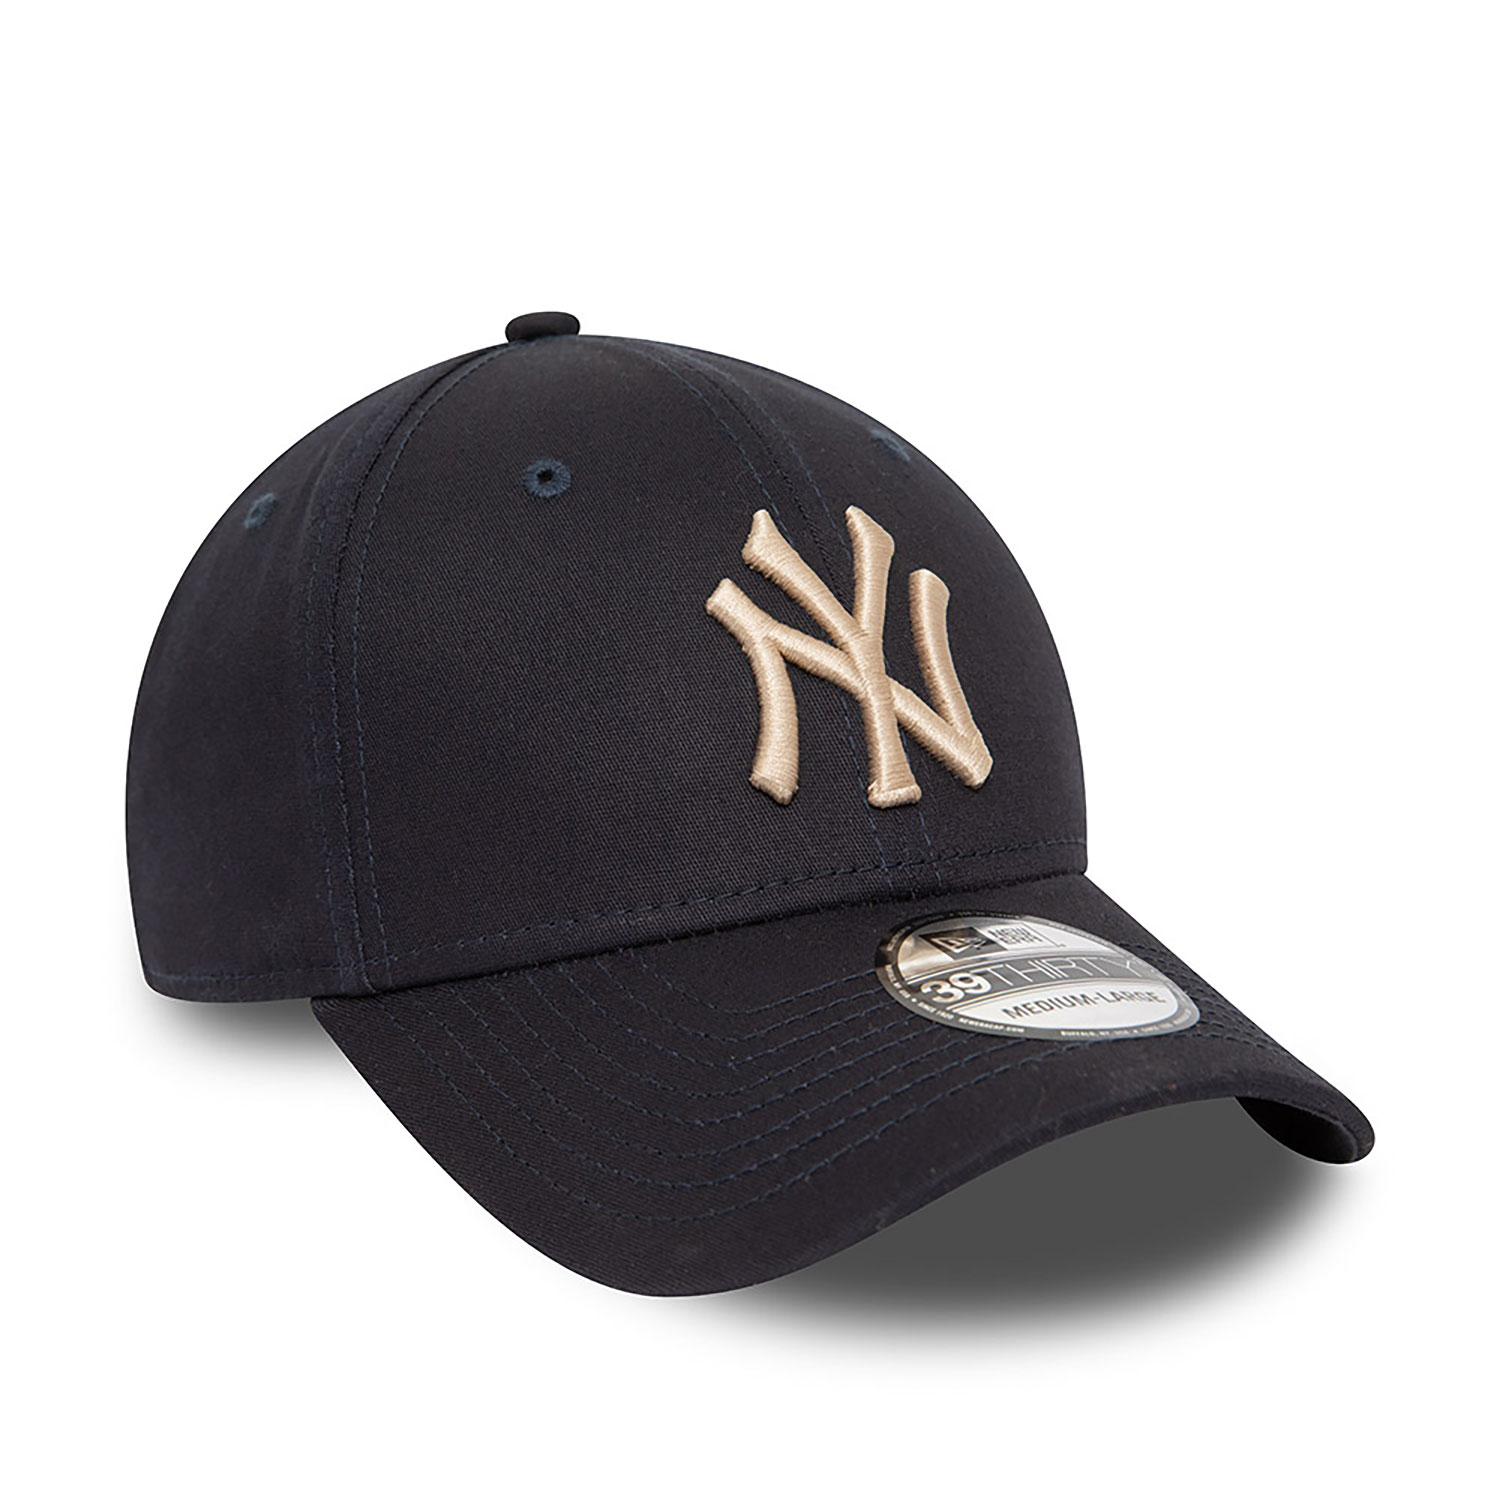 New York Yankees League Essential Navy 39THIRTY Stretch Fit Cap